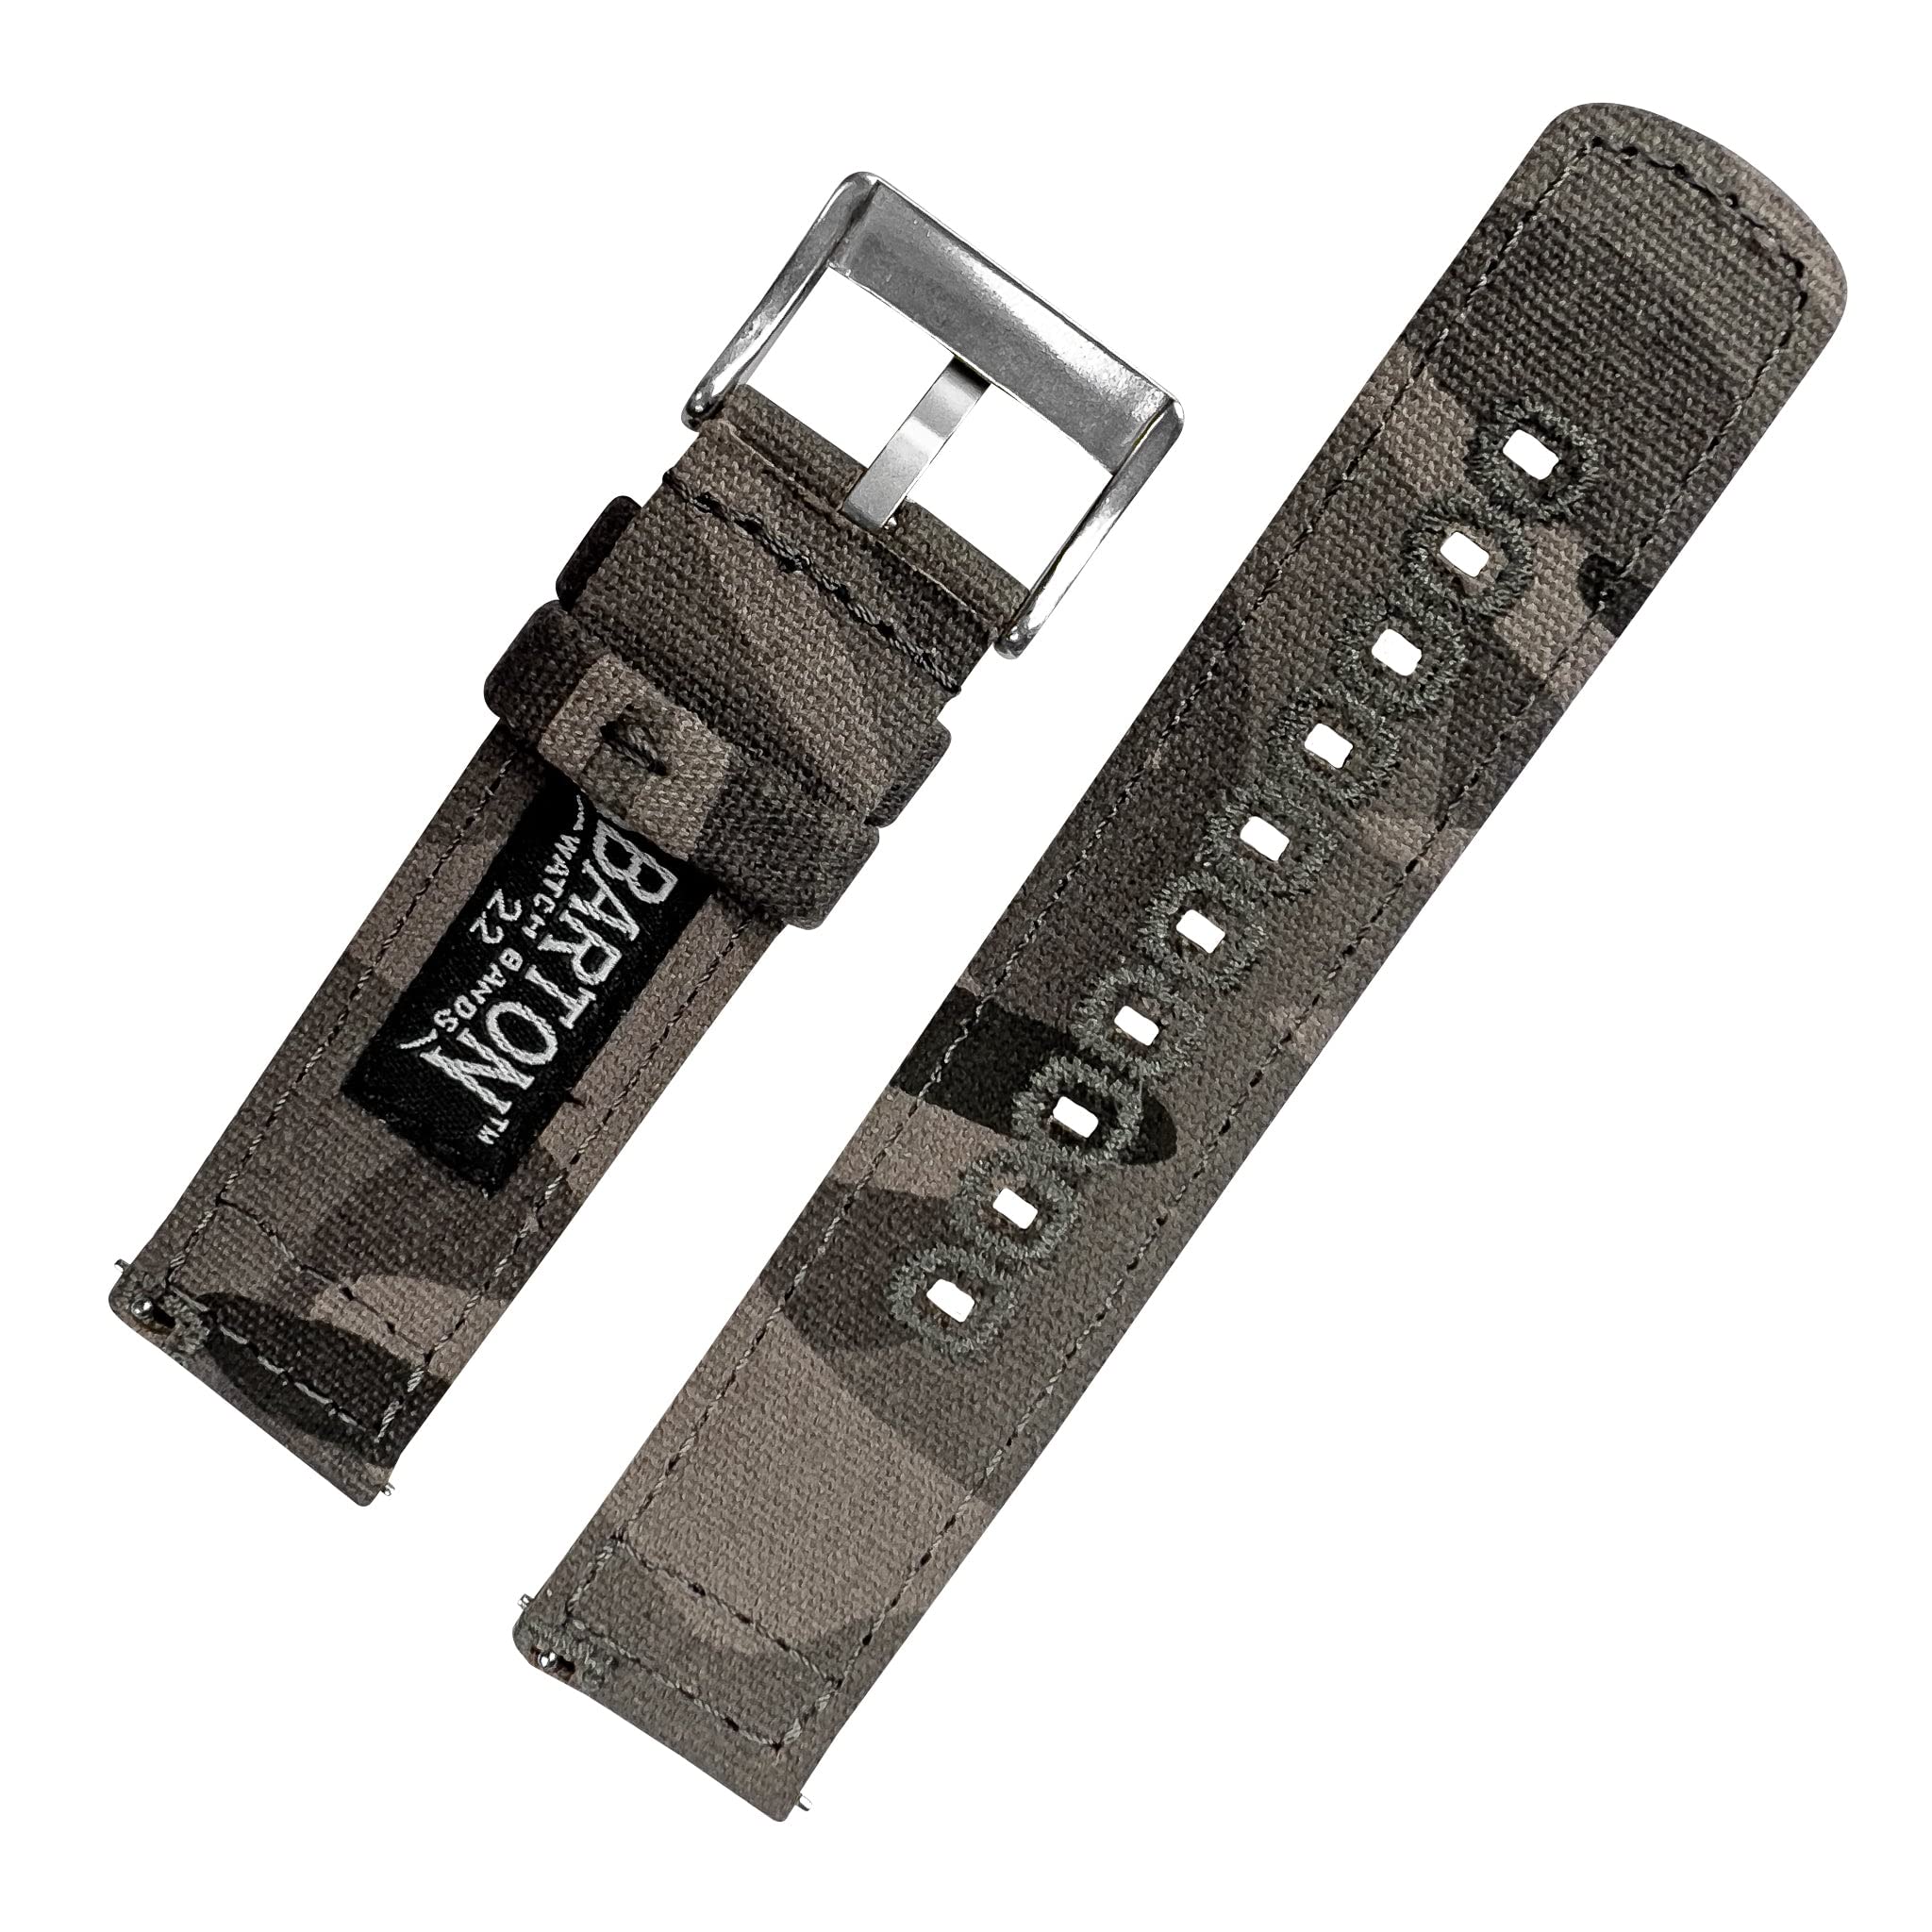 BARTON Camouflage Canvas Quick Release Watch Band Straps - Choose Color & Width - 18mm, 19mm, 20mm, 21mm, 22mm, 23mm, or 24mm